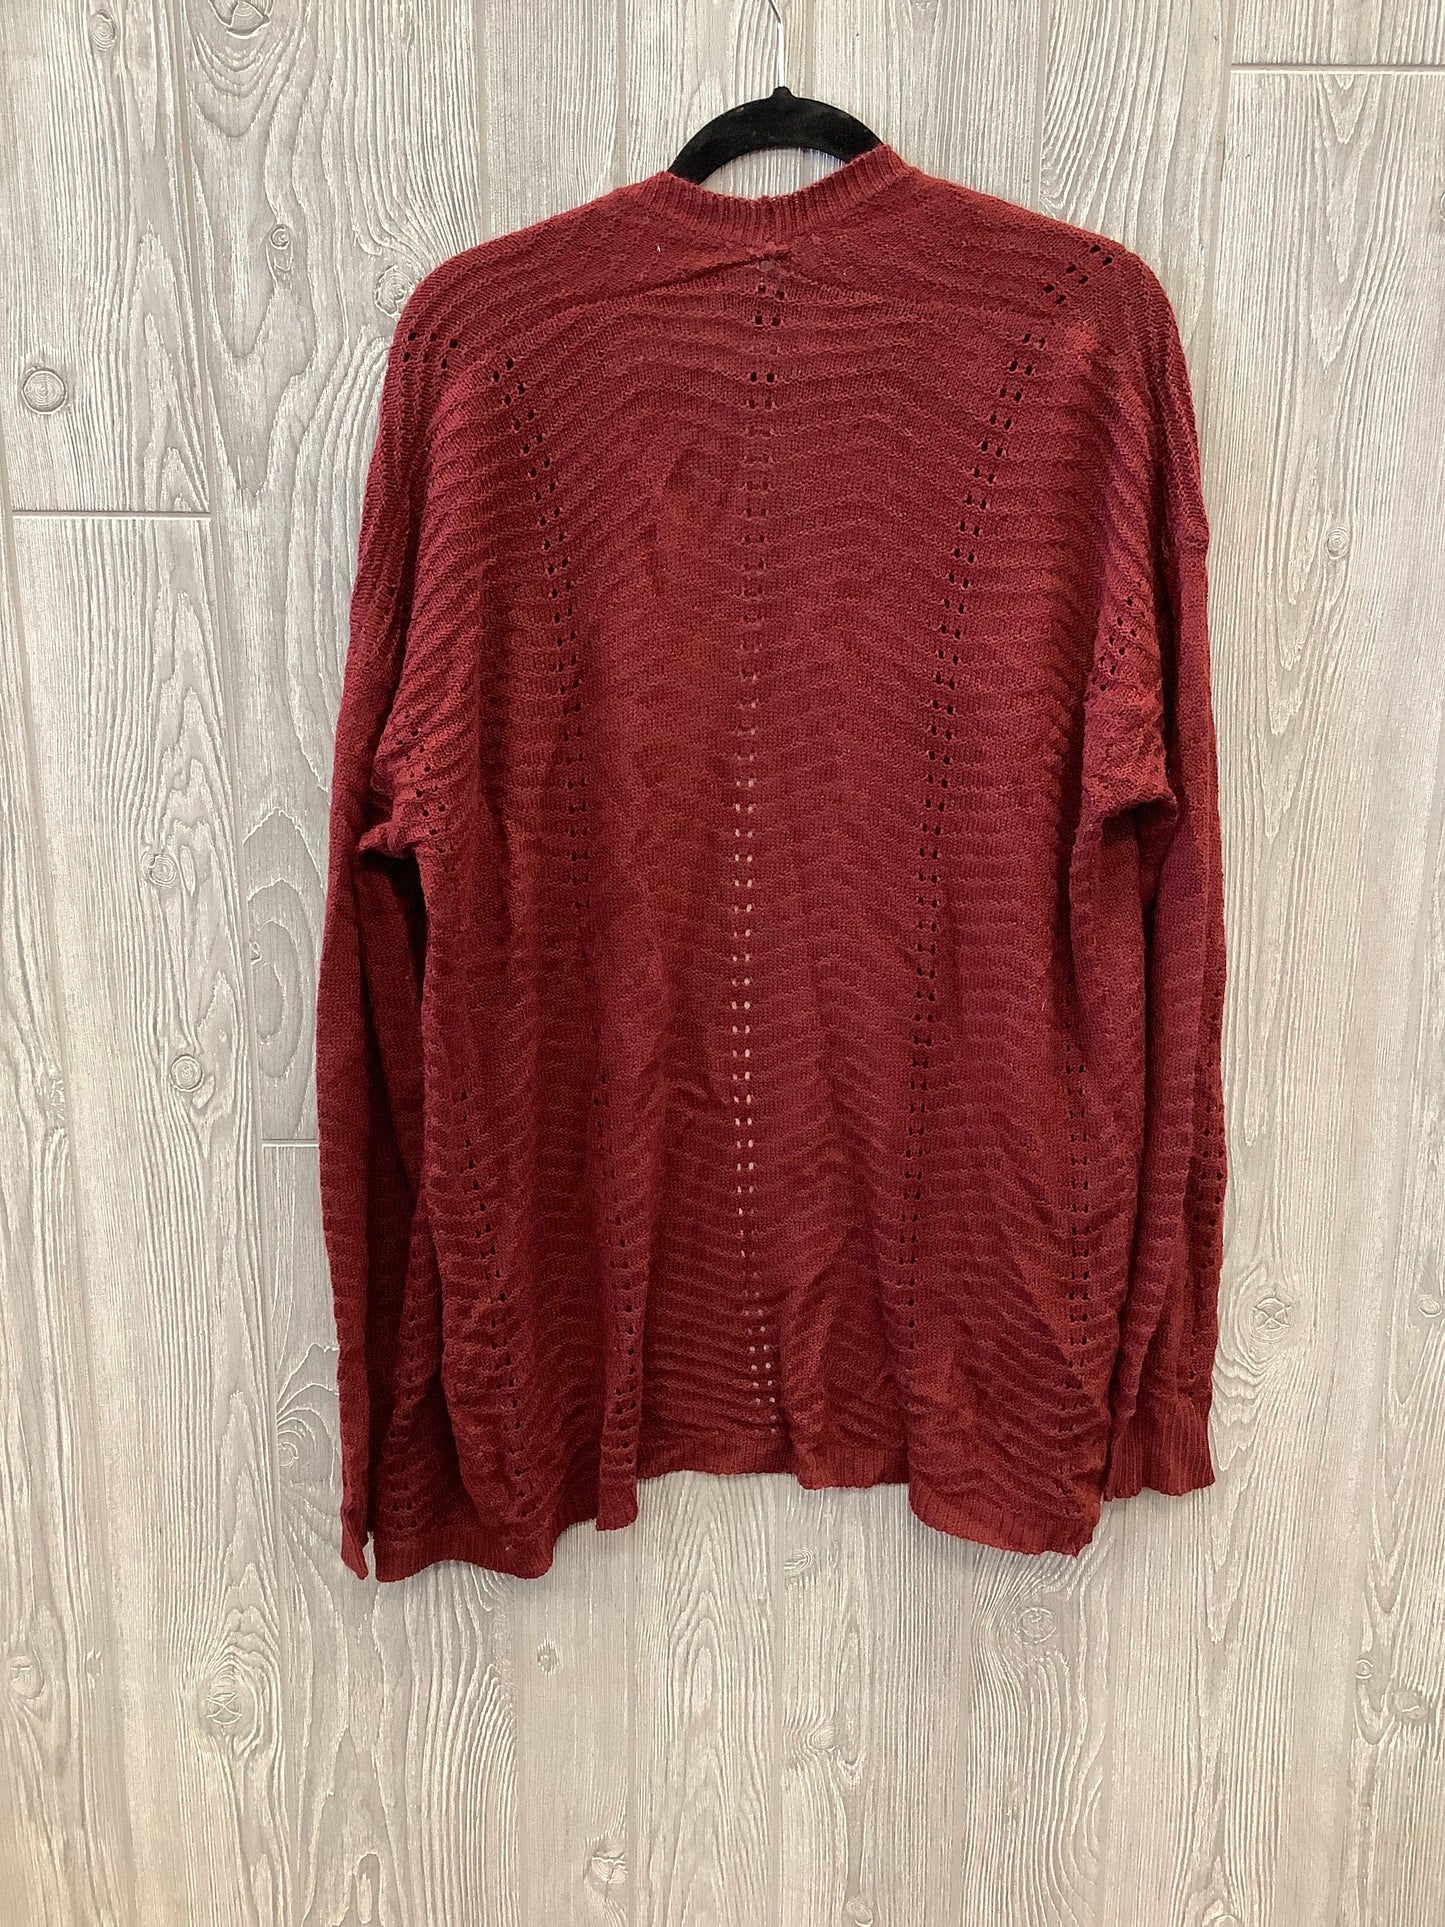 Cardigan By Clothes Mentor  Size: 2x